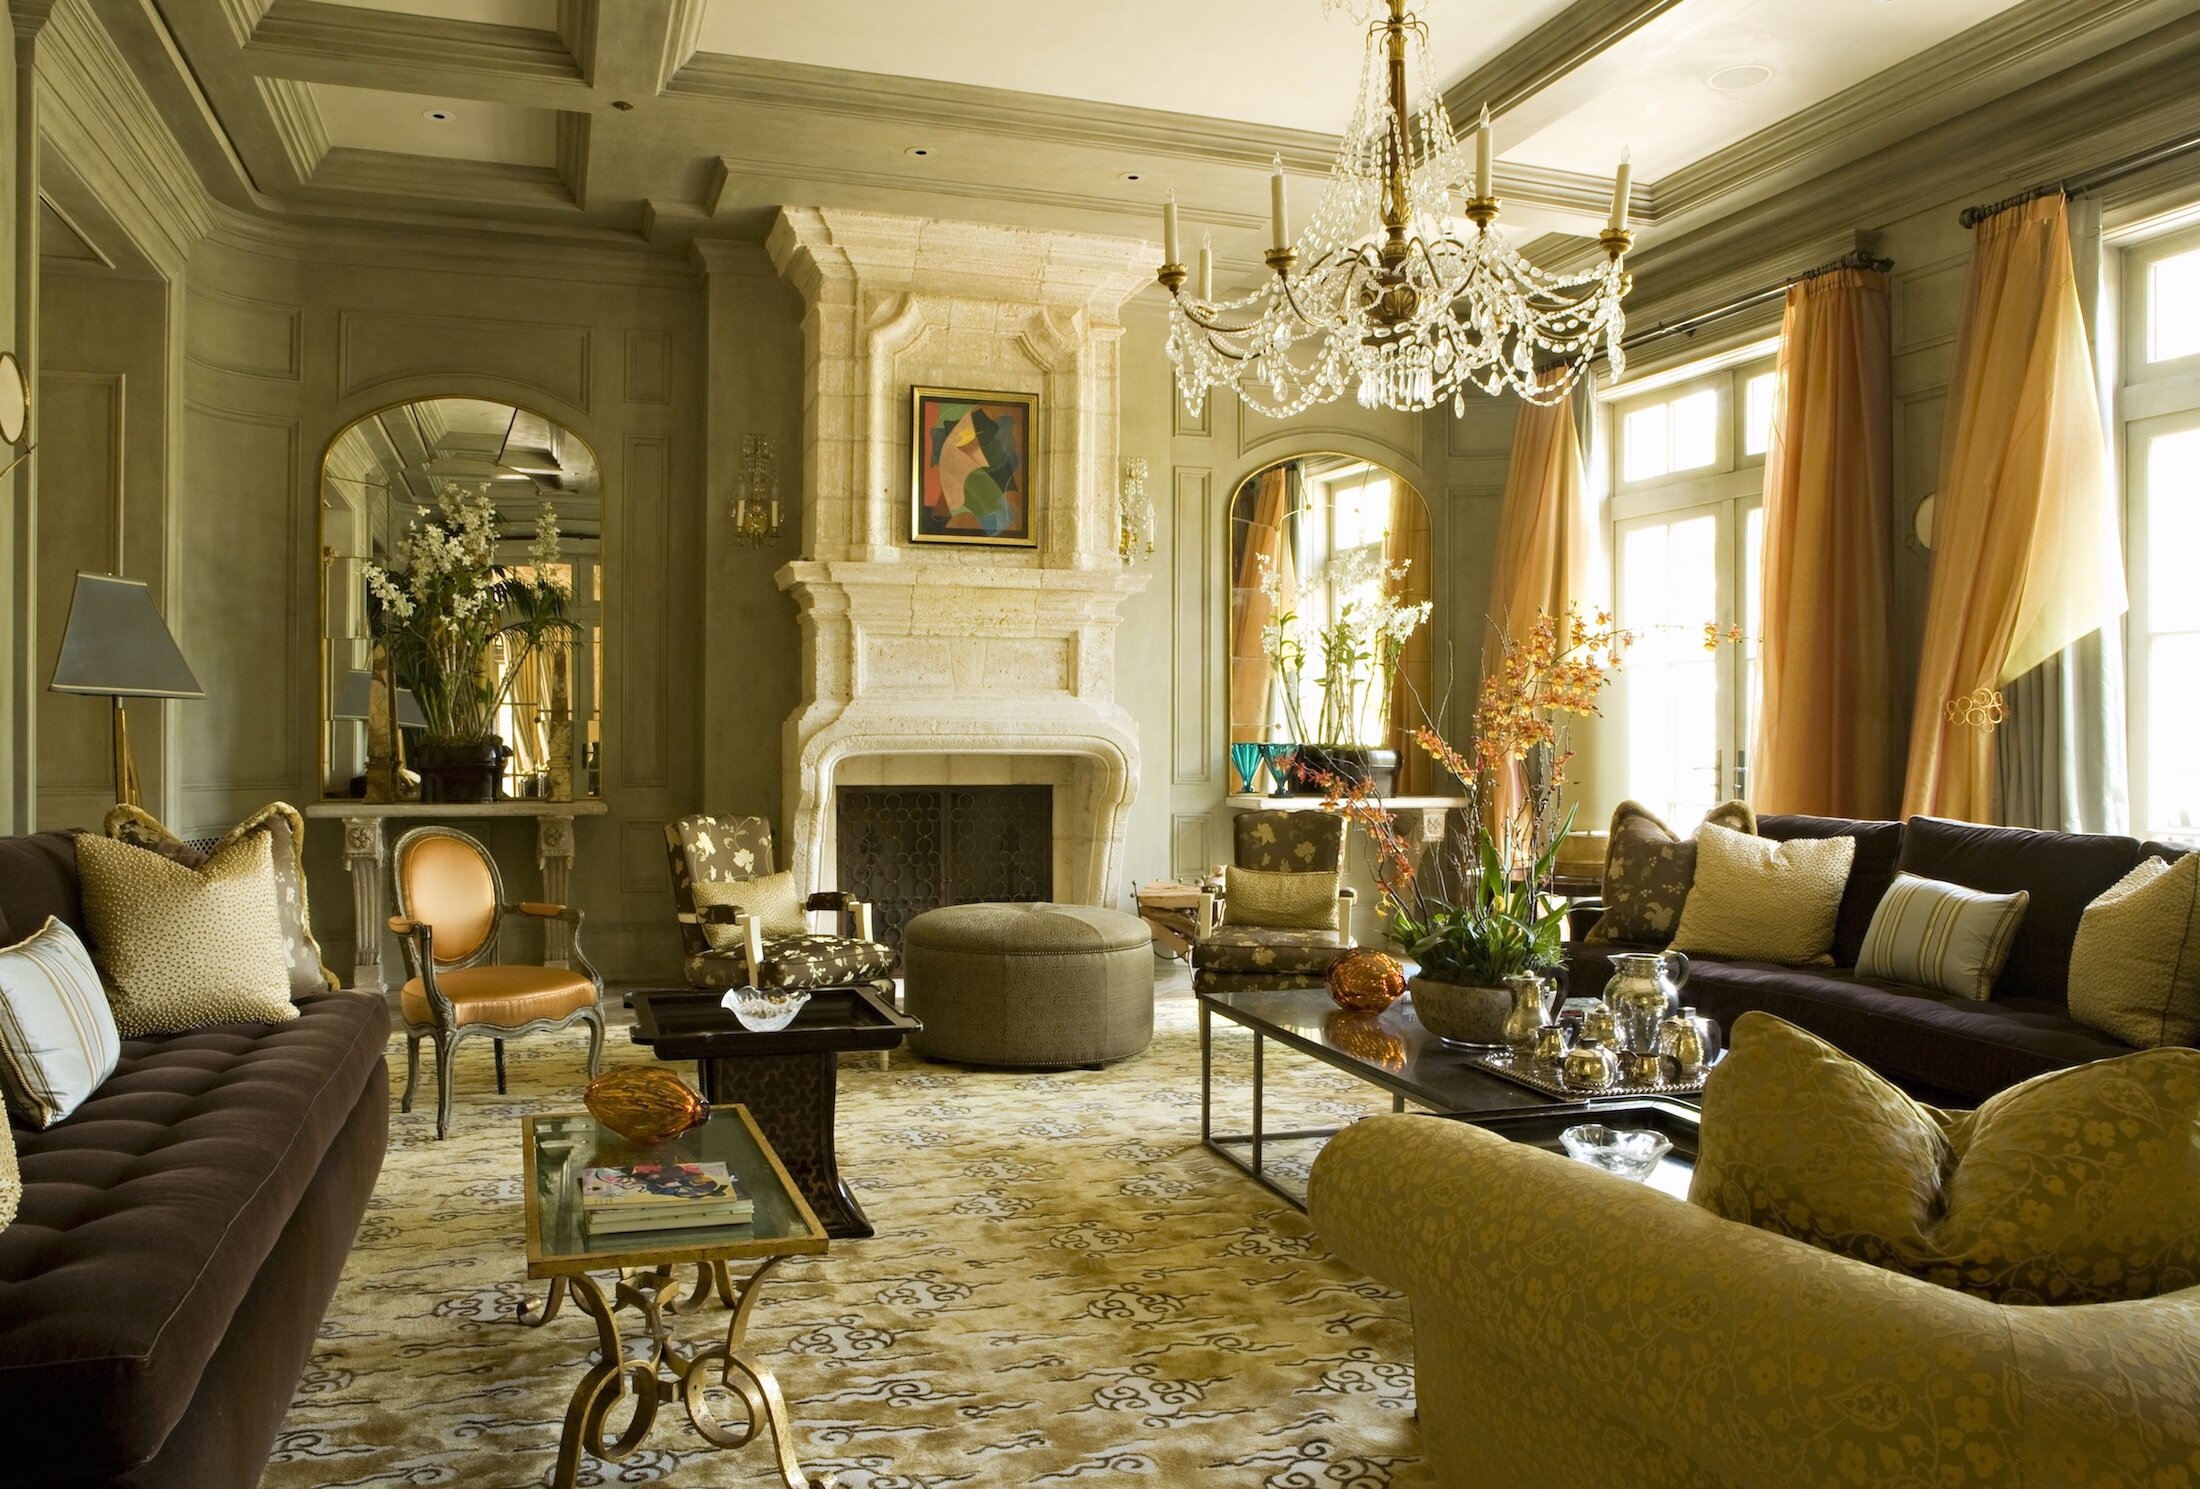 A Great room filled with antique furnishing, French accents, custom drapery and large limestone fireplace